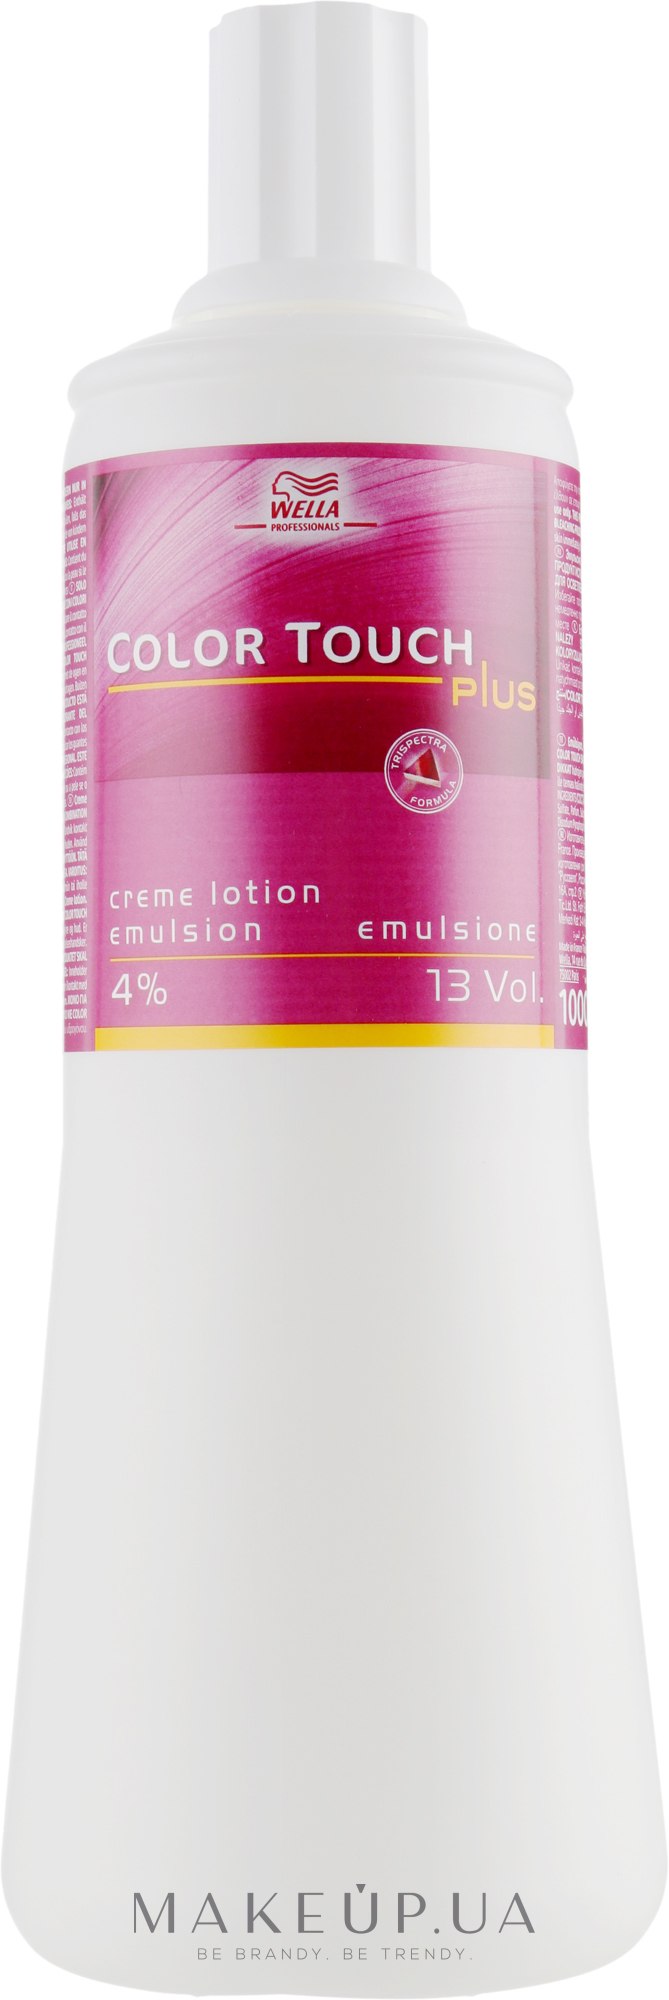 Эмульсия для краски Color Touch Plus - Wella Professionals Color Touch Plus Emulsion 4% — фото 1000ml